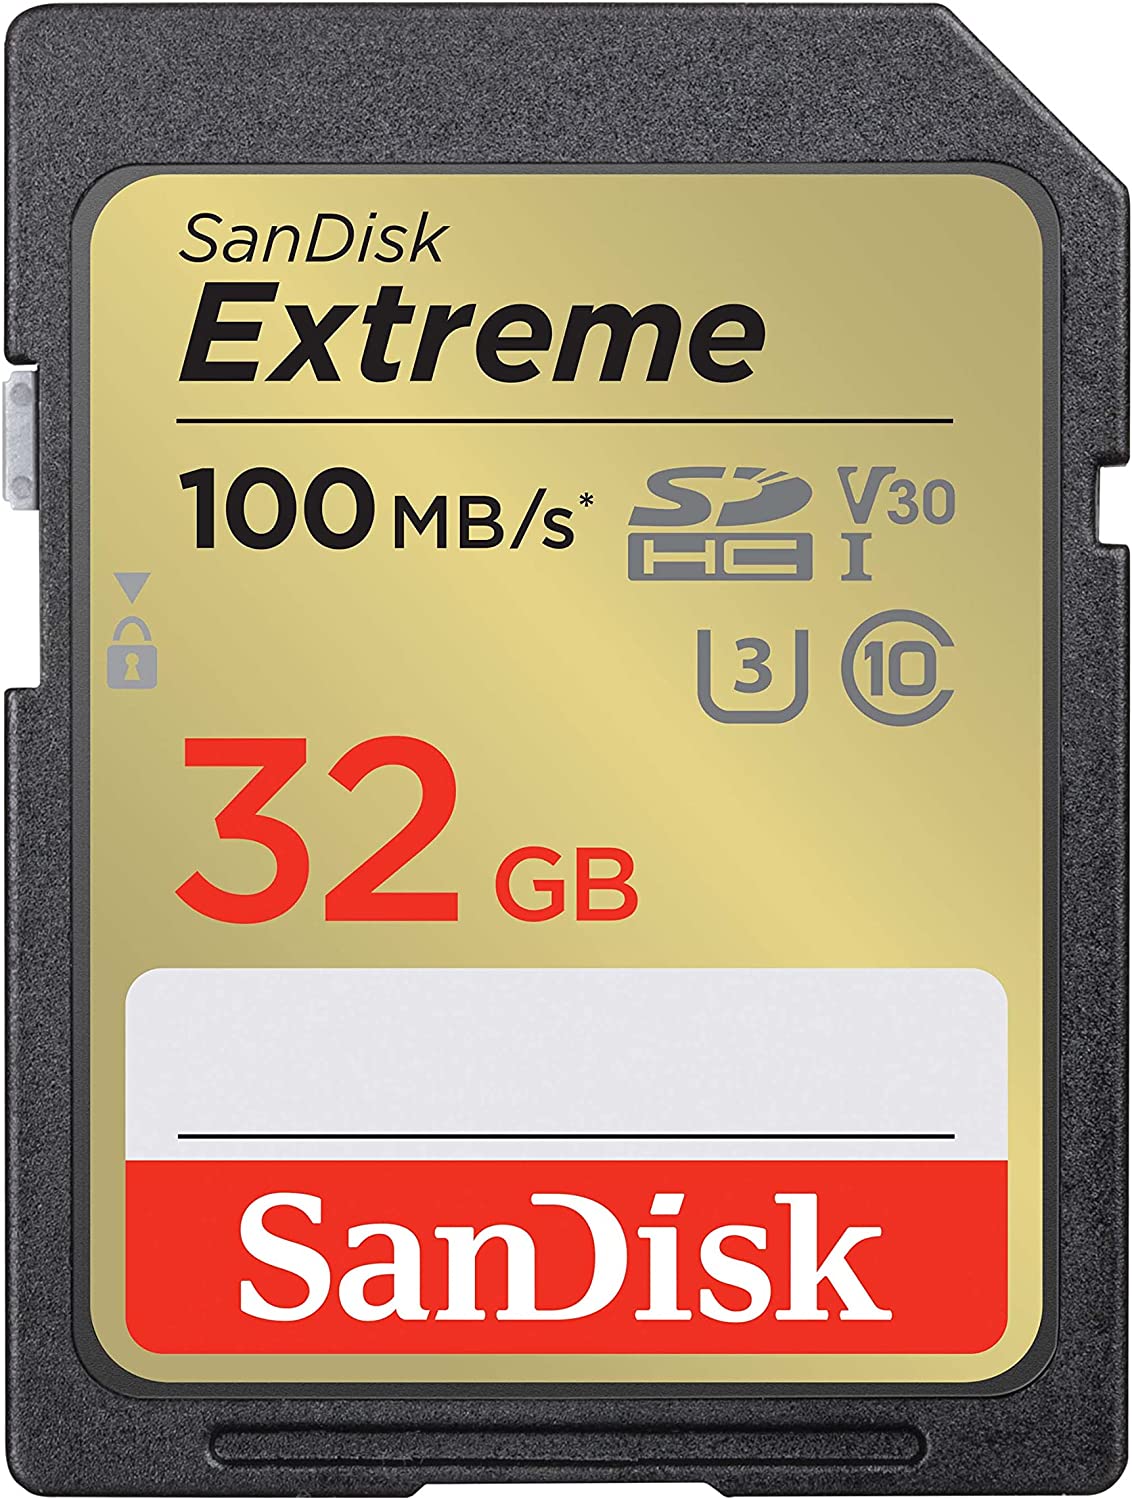 SanDisk Extreme SDHC 32GB 100MB/s UHS-I Memory Card